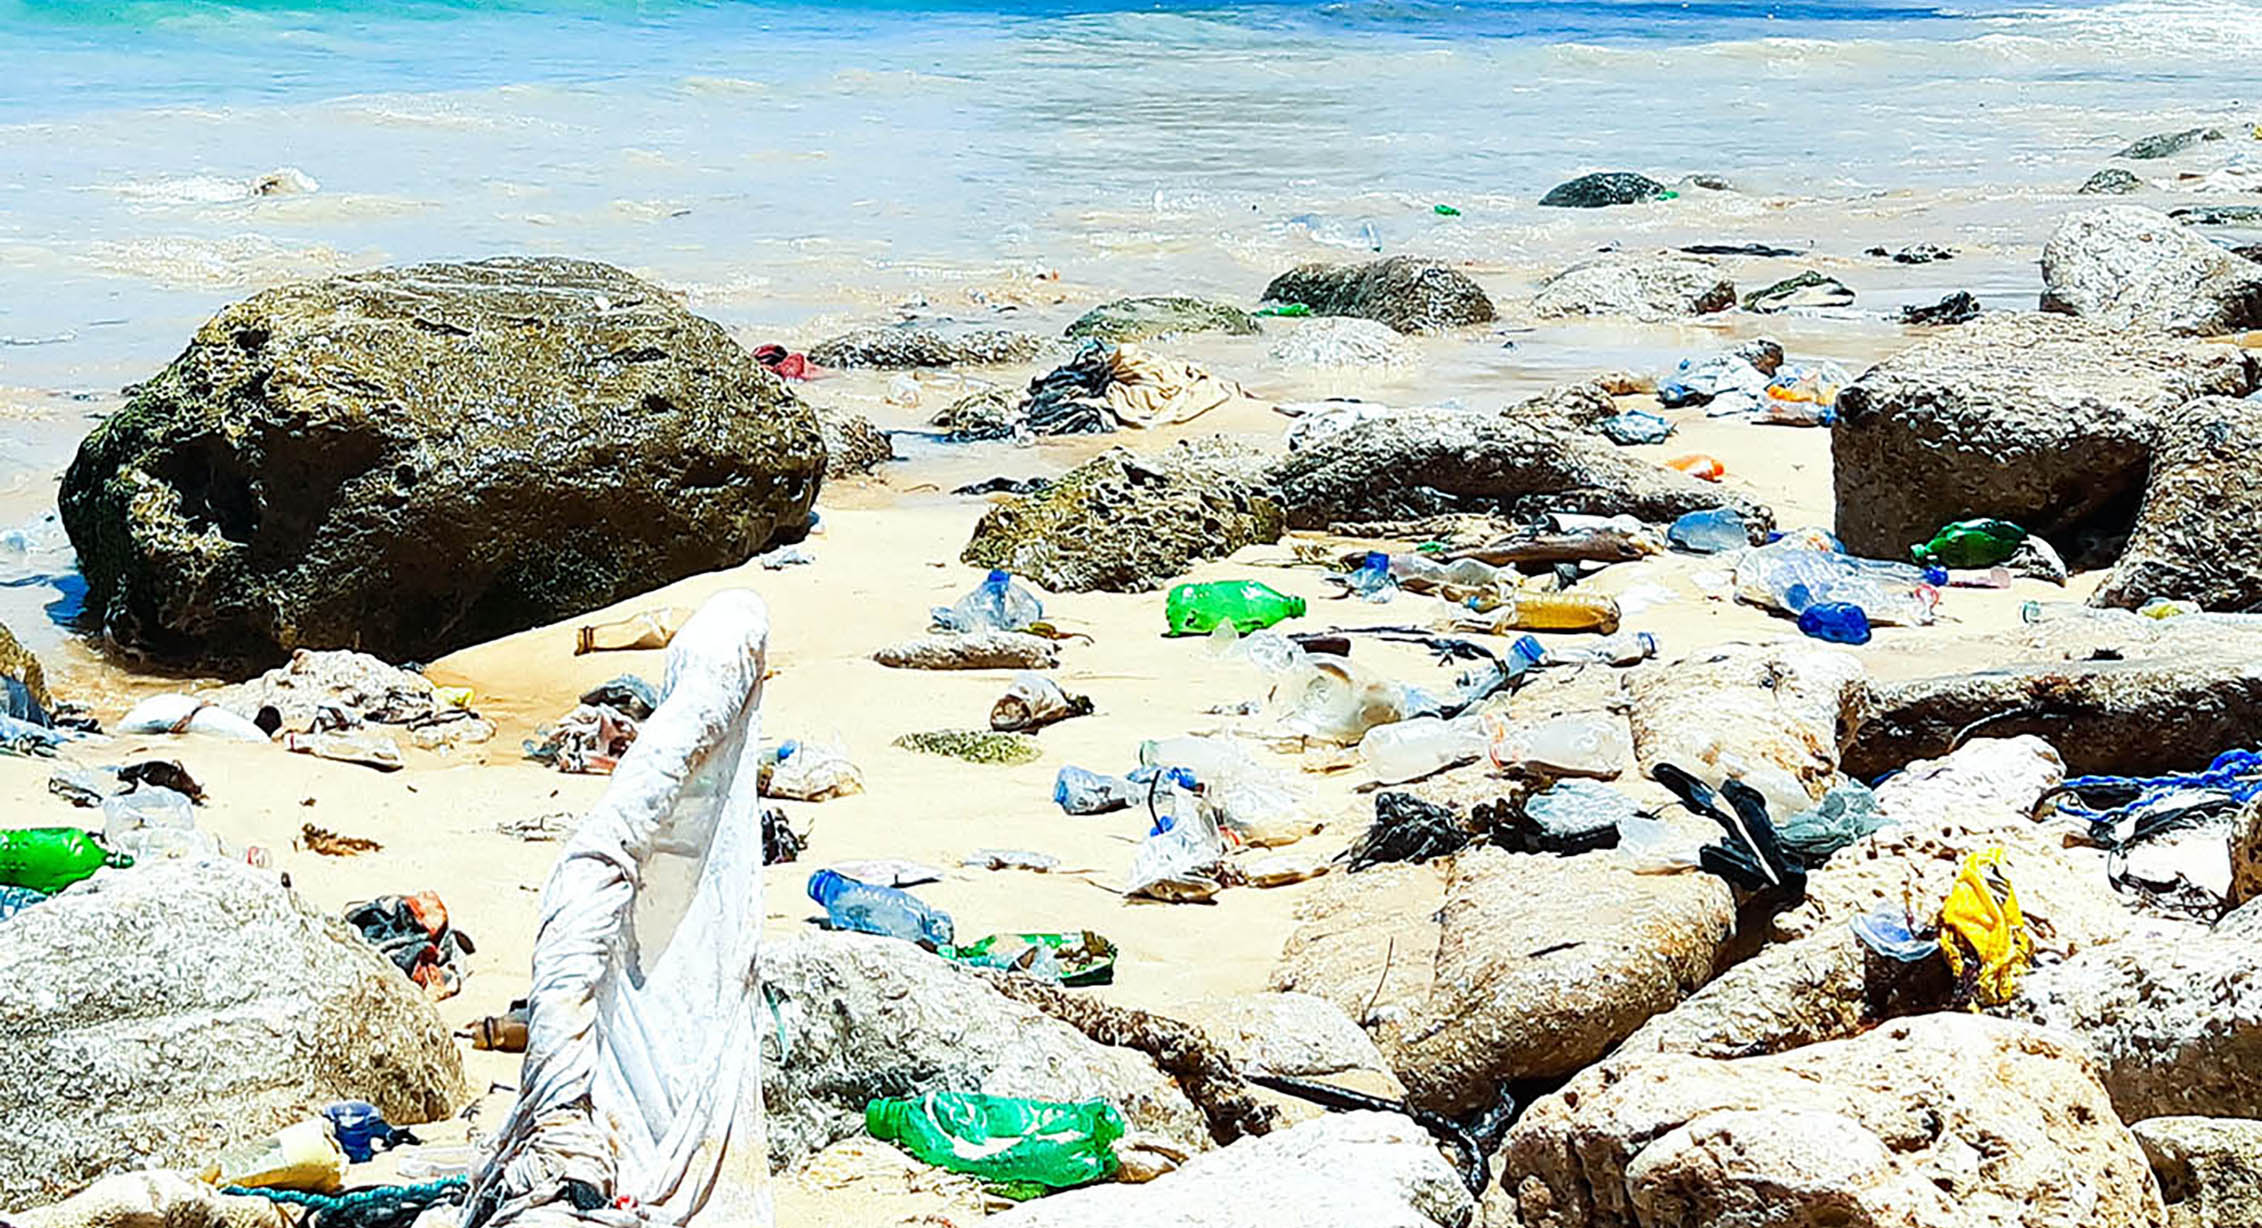 Plastic bottles washed up on a beach